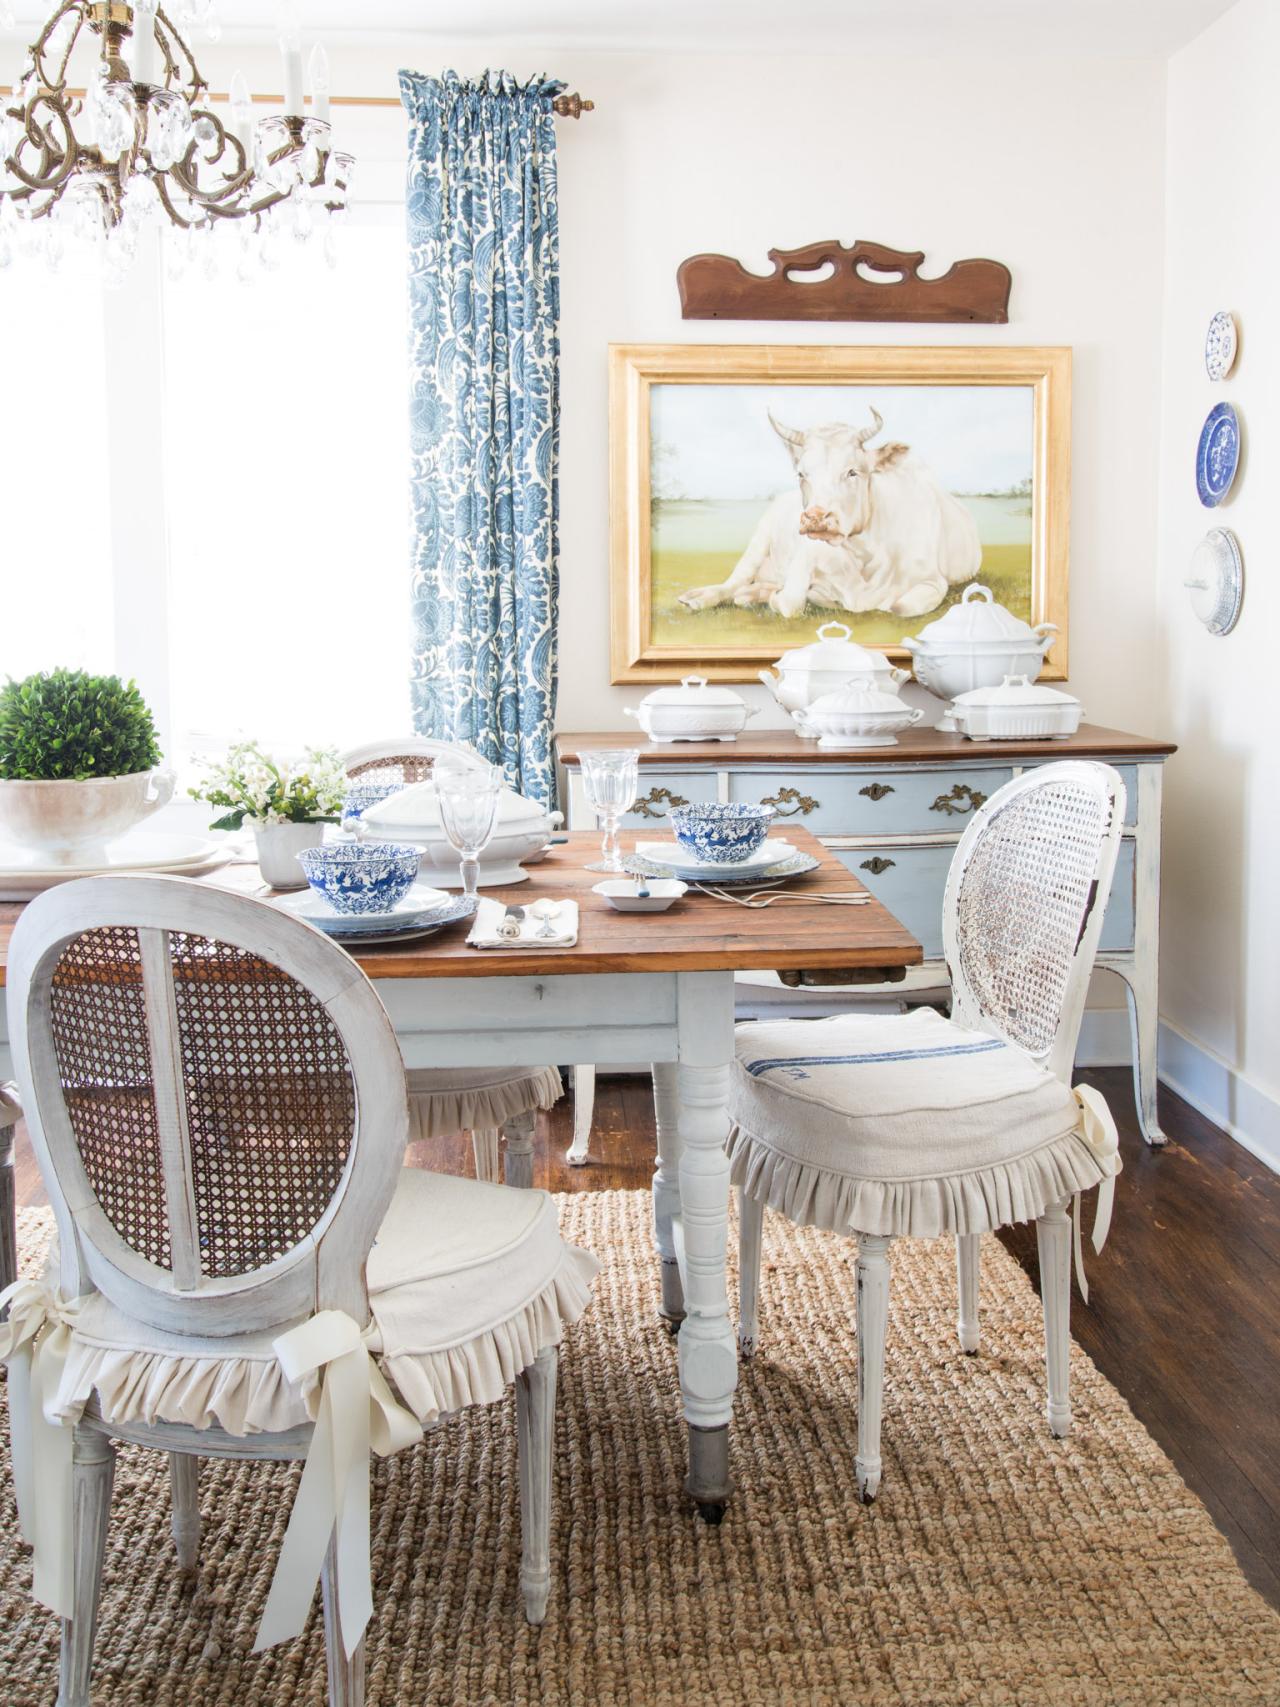 How To Slipcover A Dining Chair, Best Slipcovers For Dining Room Chairs